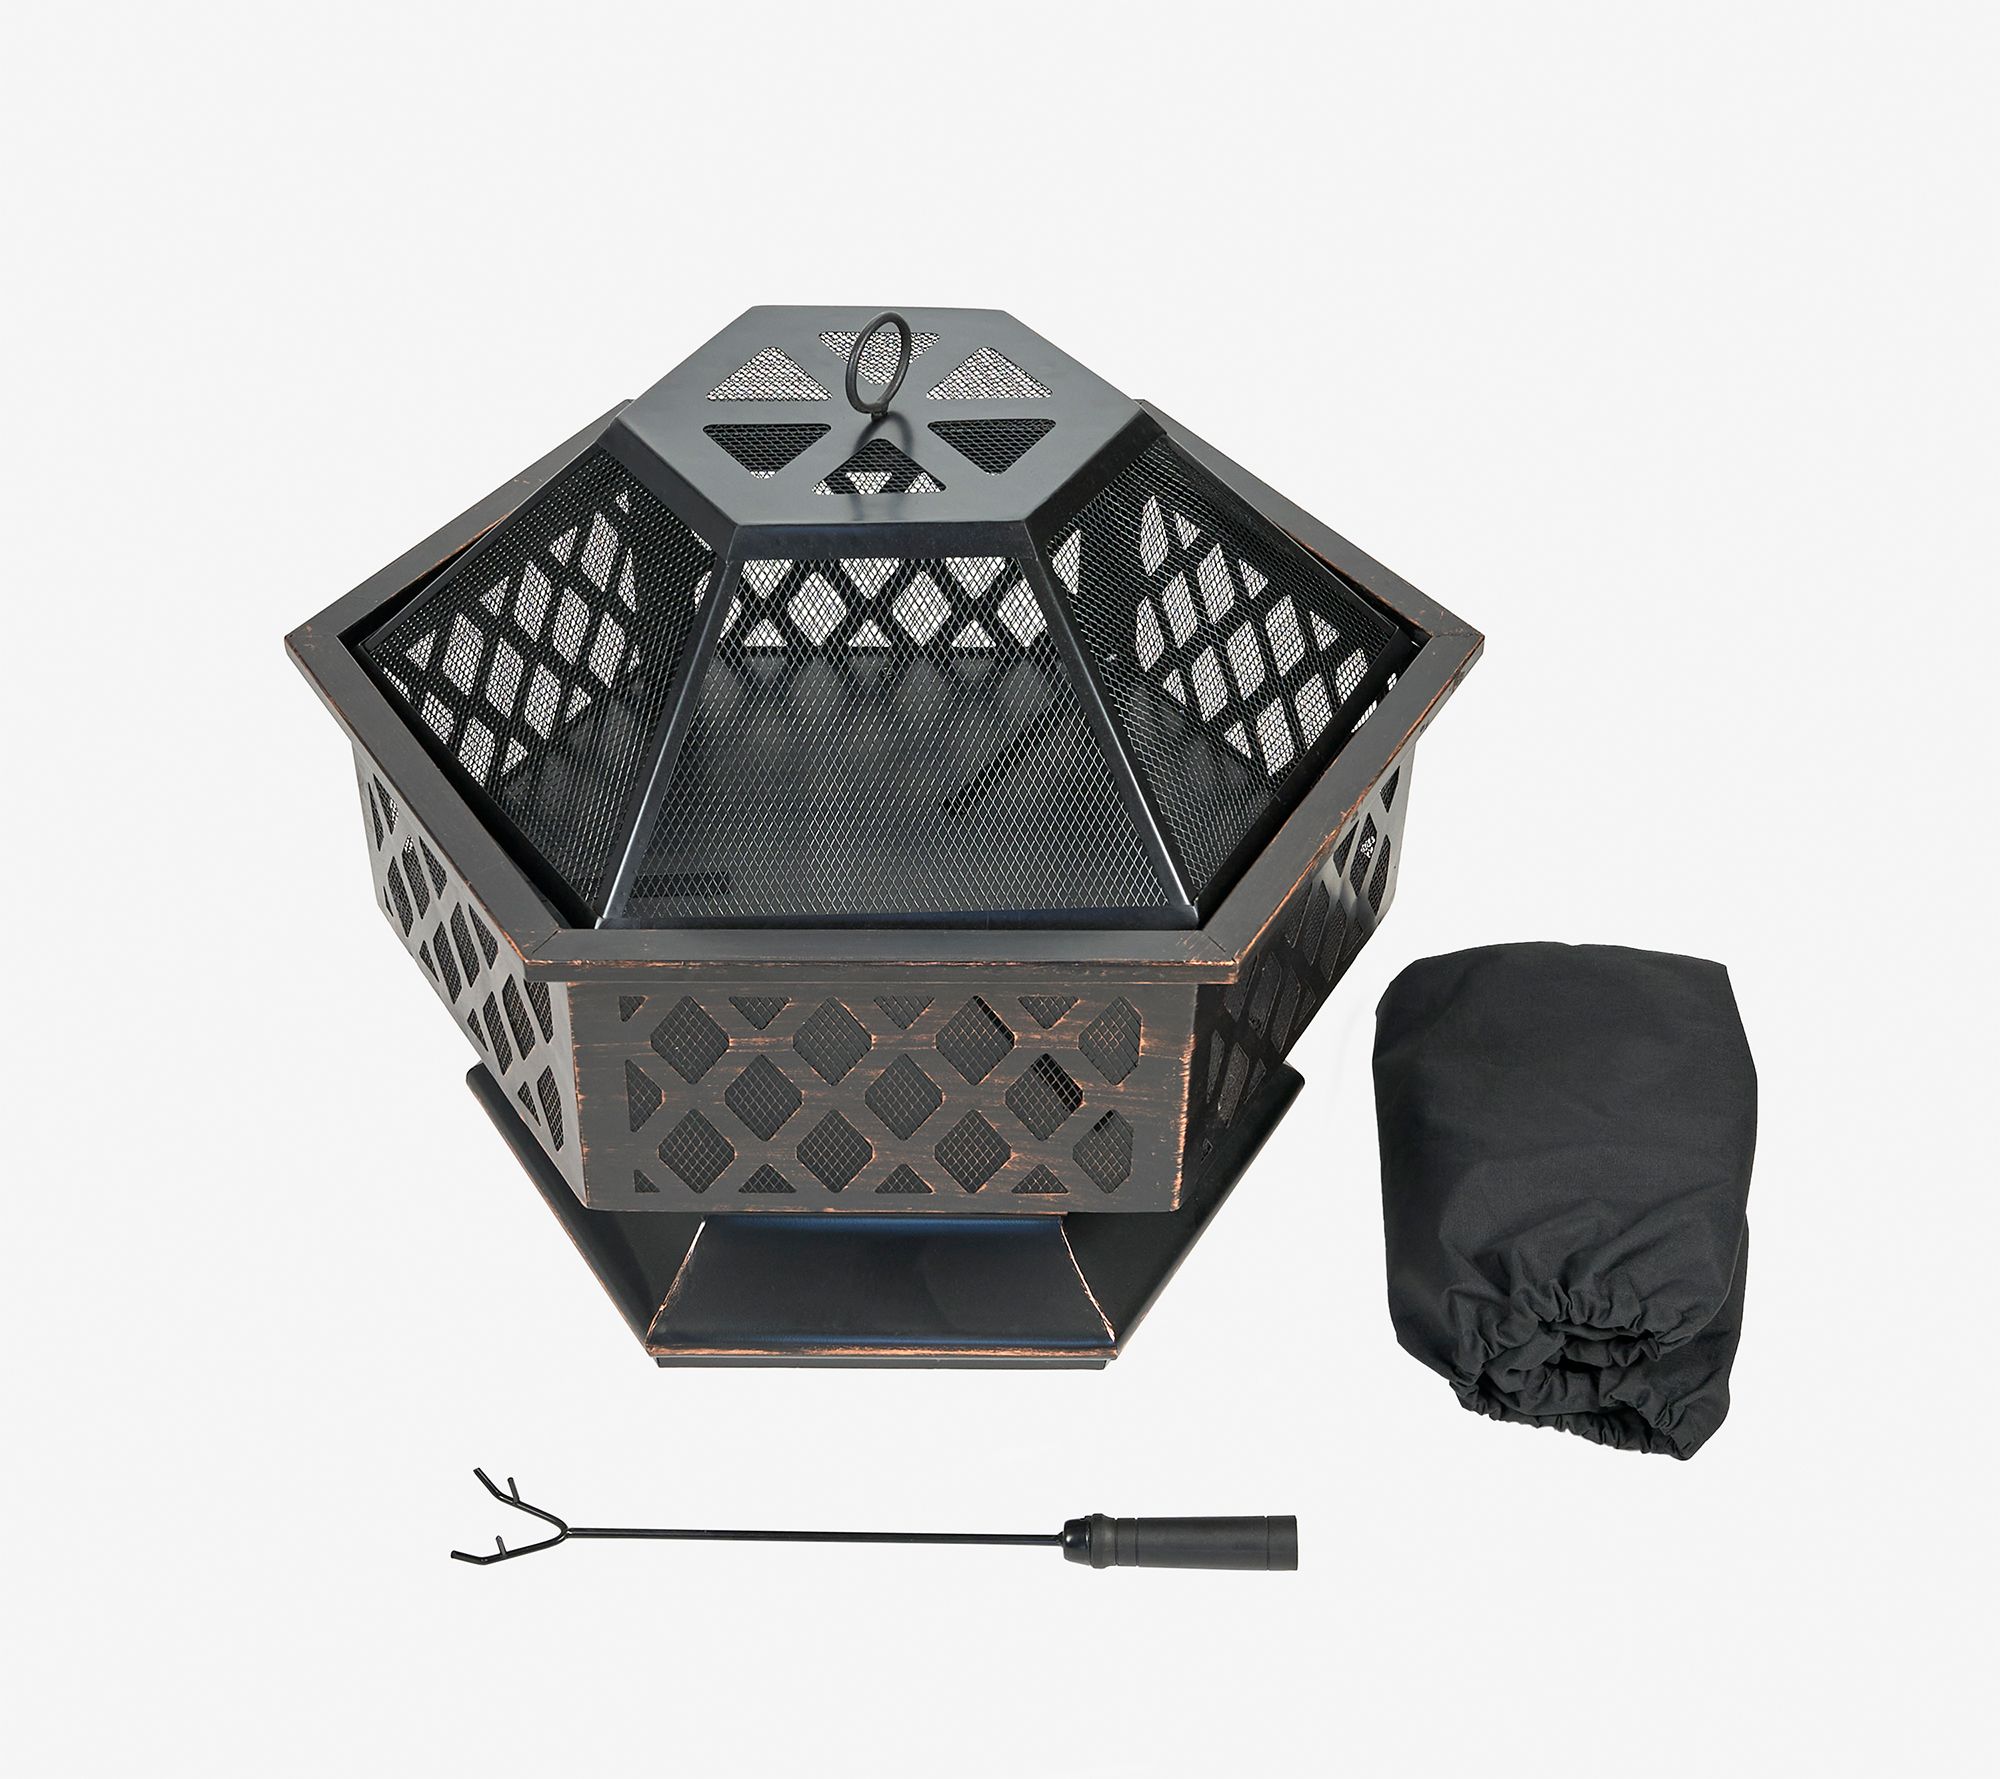 Endless Summer Wood Burning Hexagon, Hex Fire Pit Cover